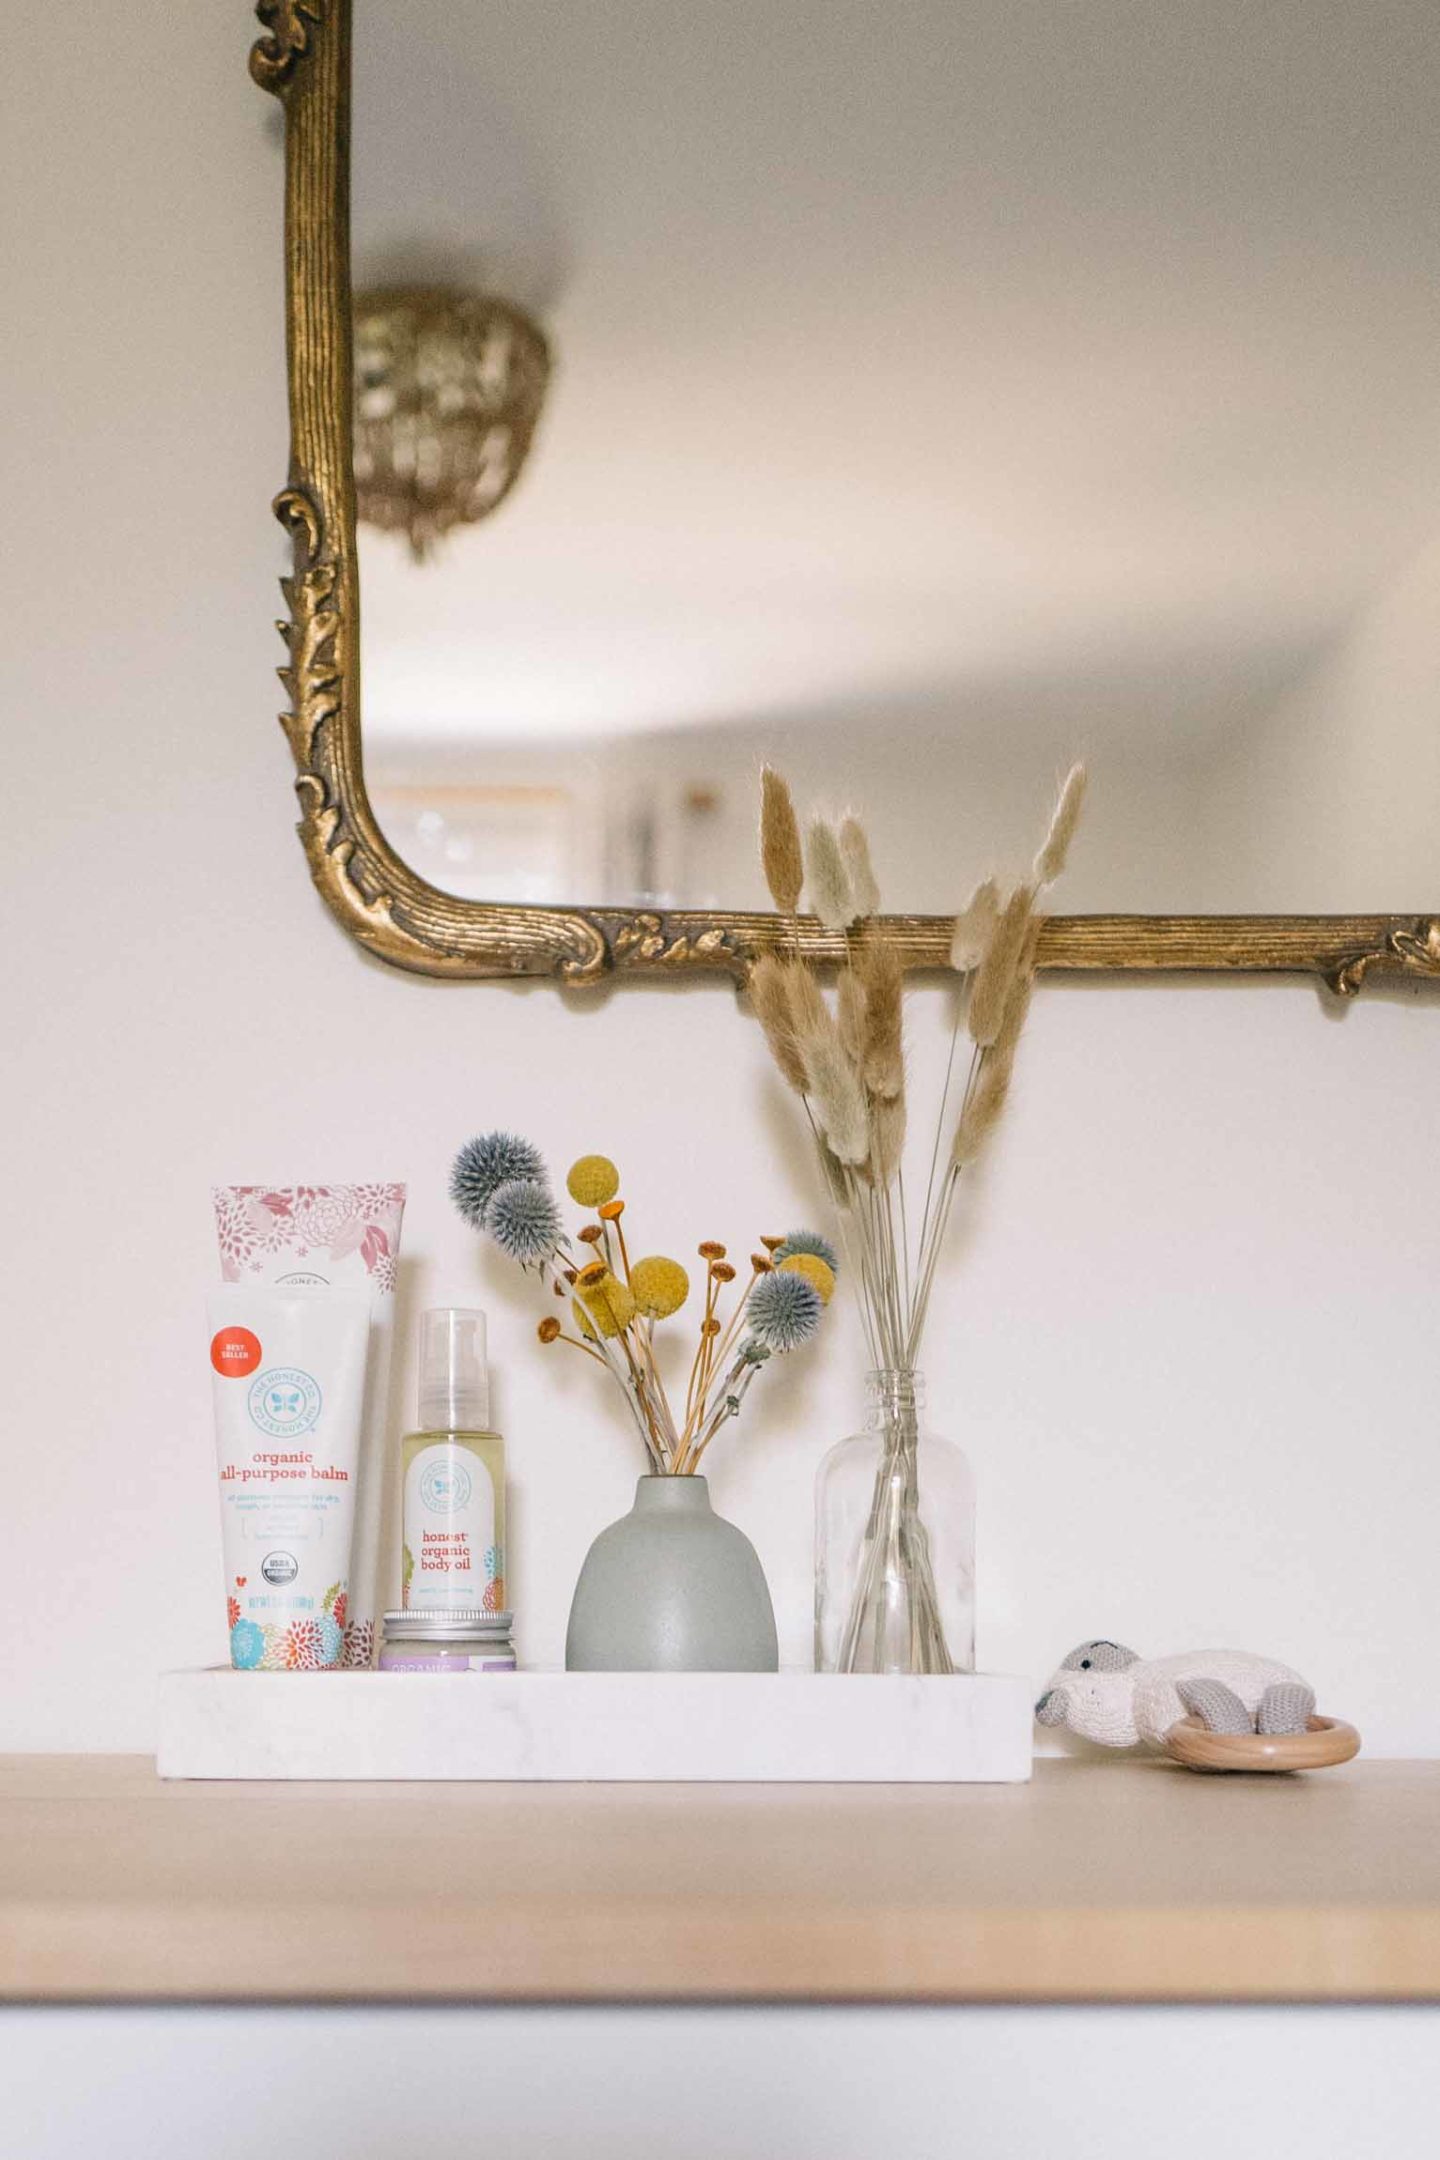 Jess Ann Kirby's nursery vanity is styled with dried flowers and clean baby products.